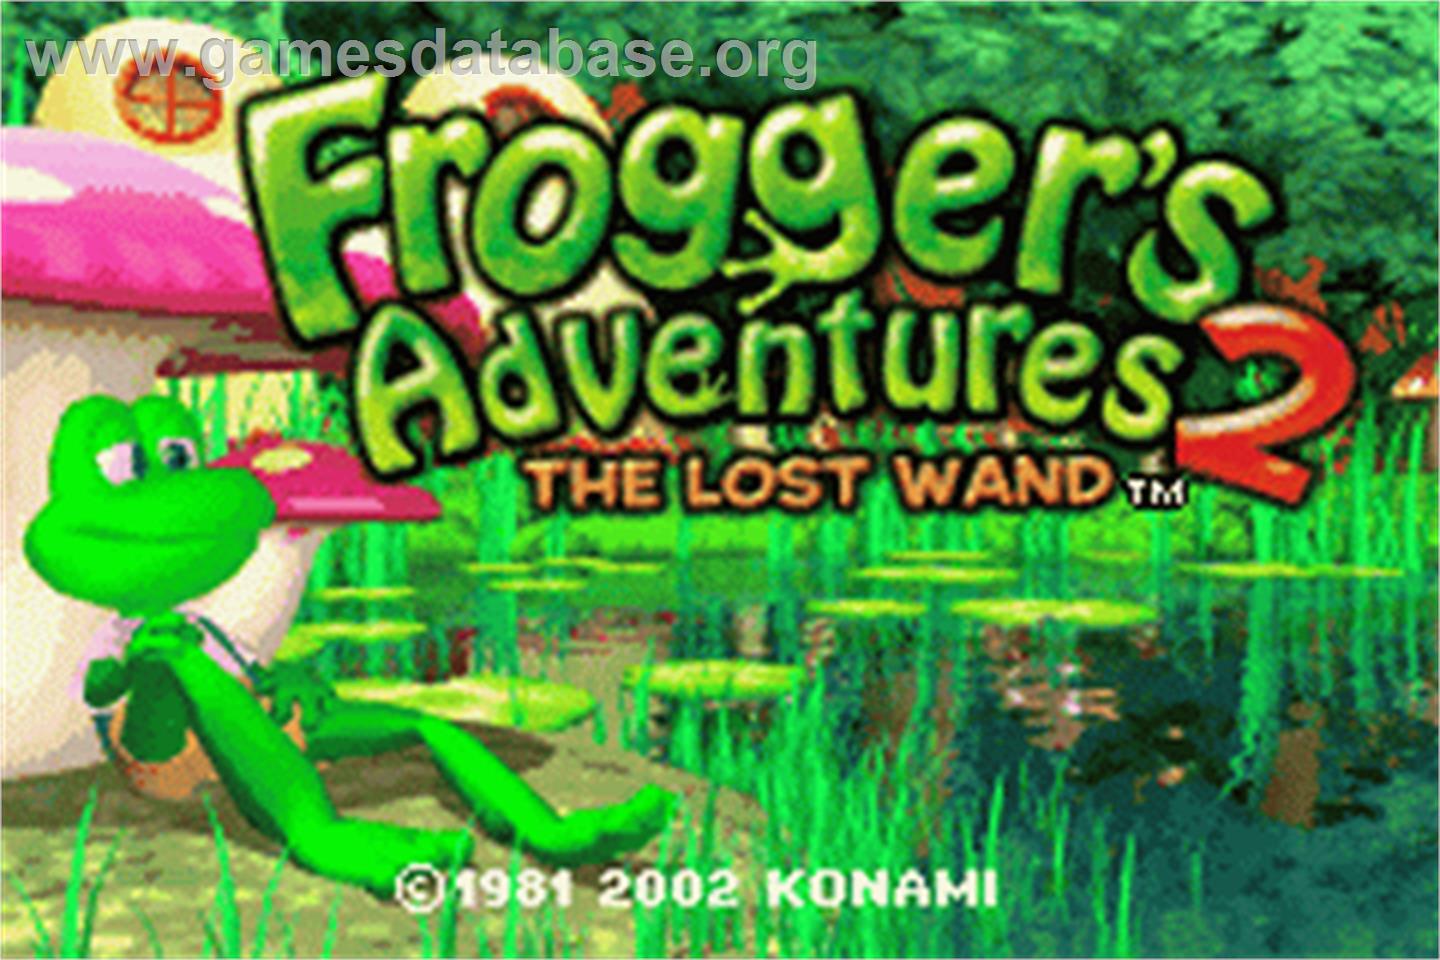 Frogger's Adventures 2: The Lost Wand - Nintendo Game Boy Advance - Artwork - Title Screen